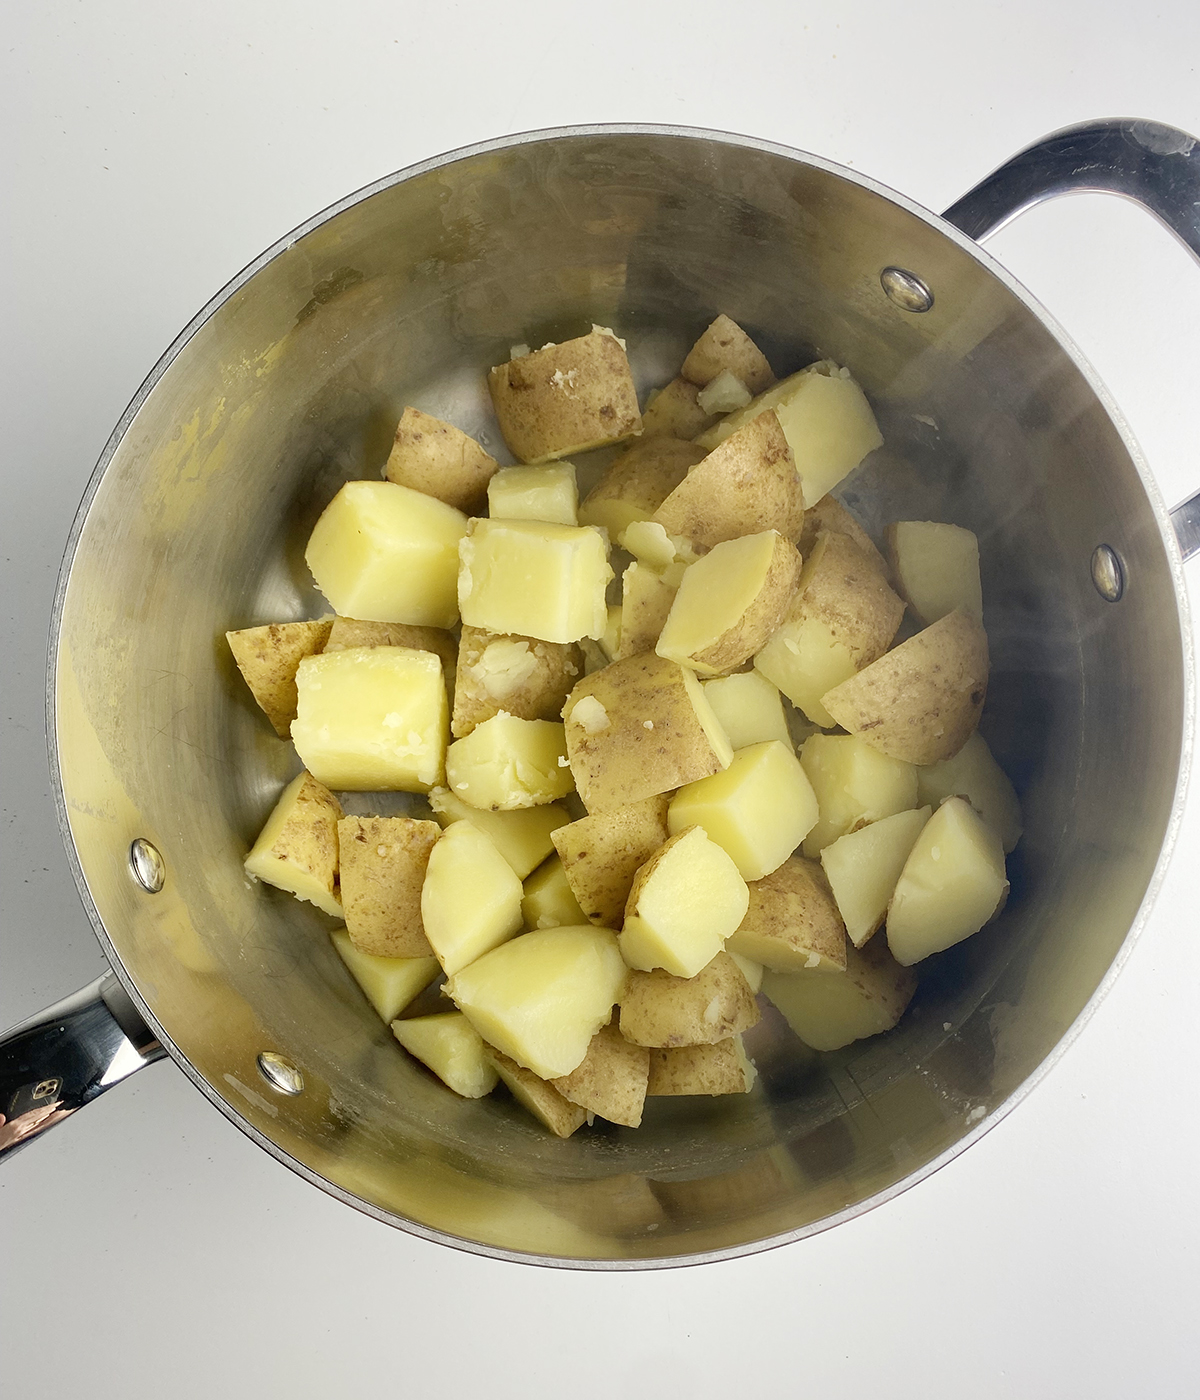 Cubed cooked potatoes in a pot.